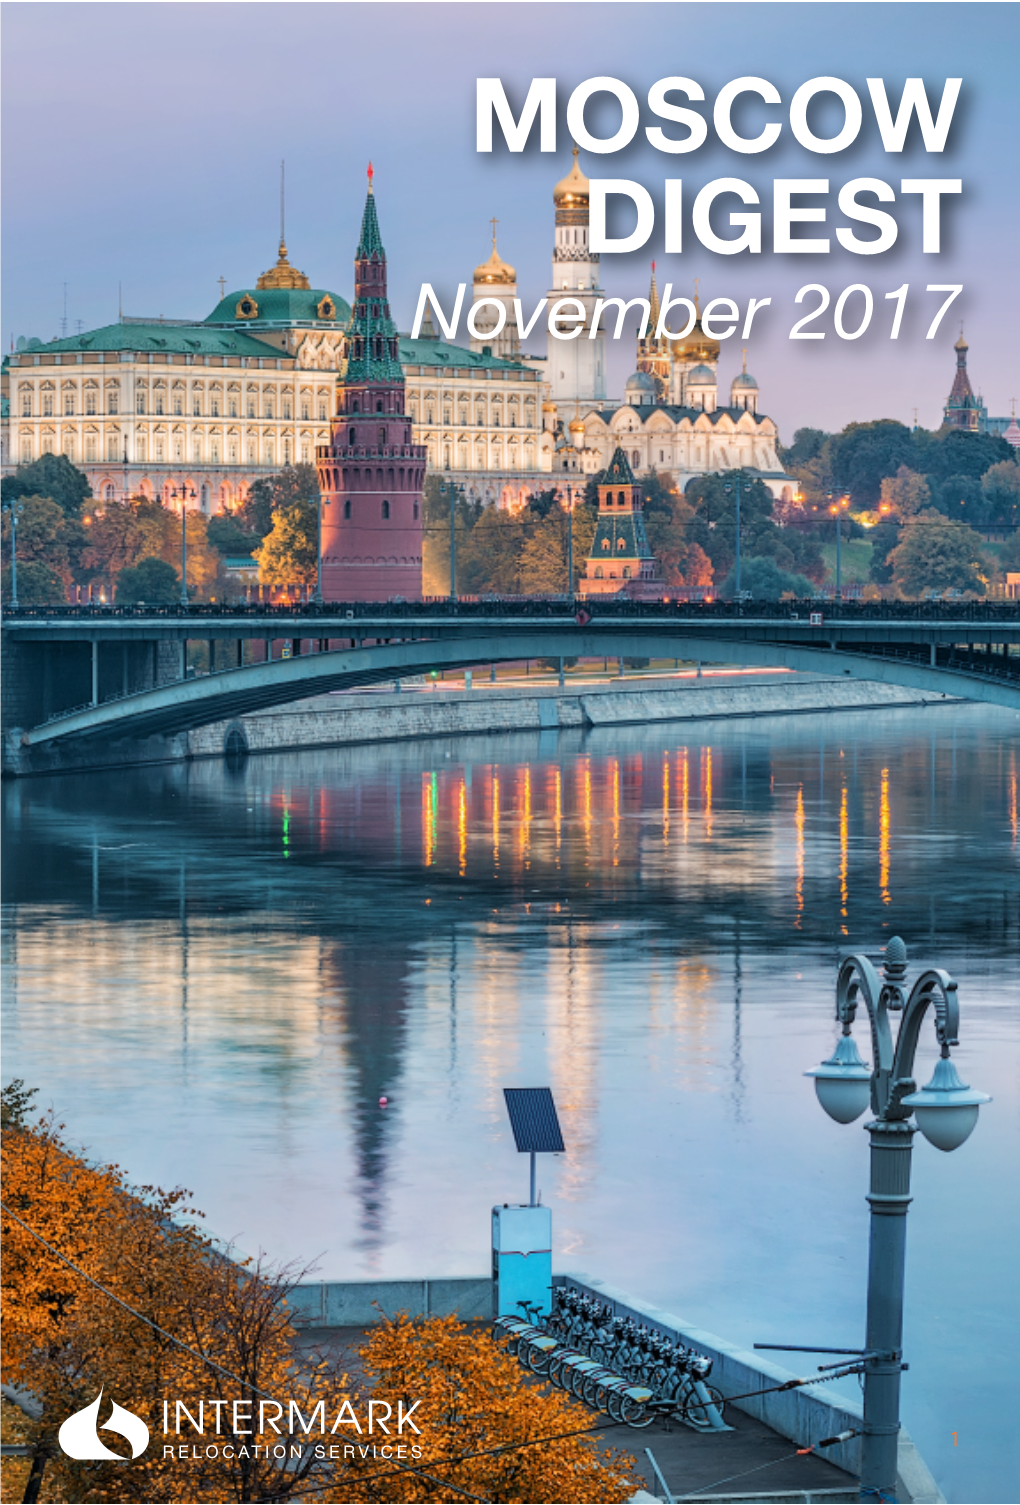 MOSCOW DIGEST November 2017